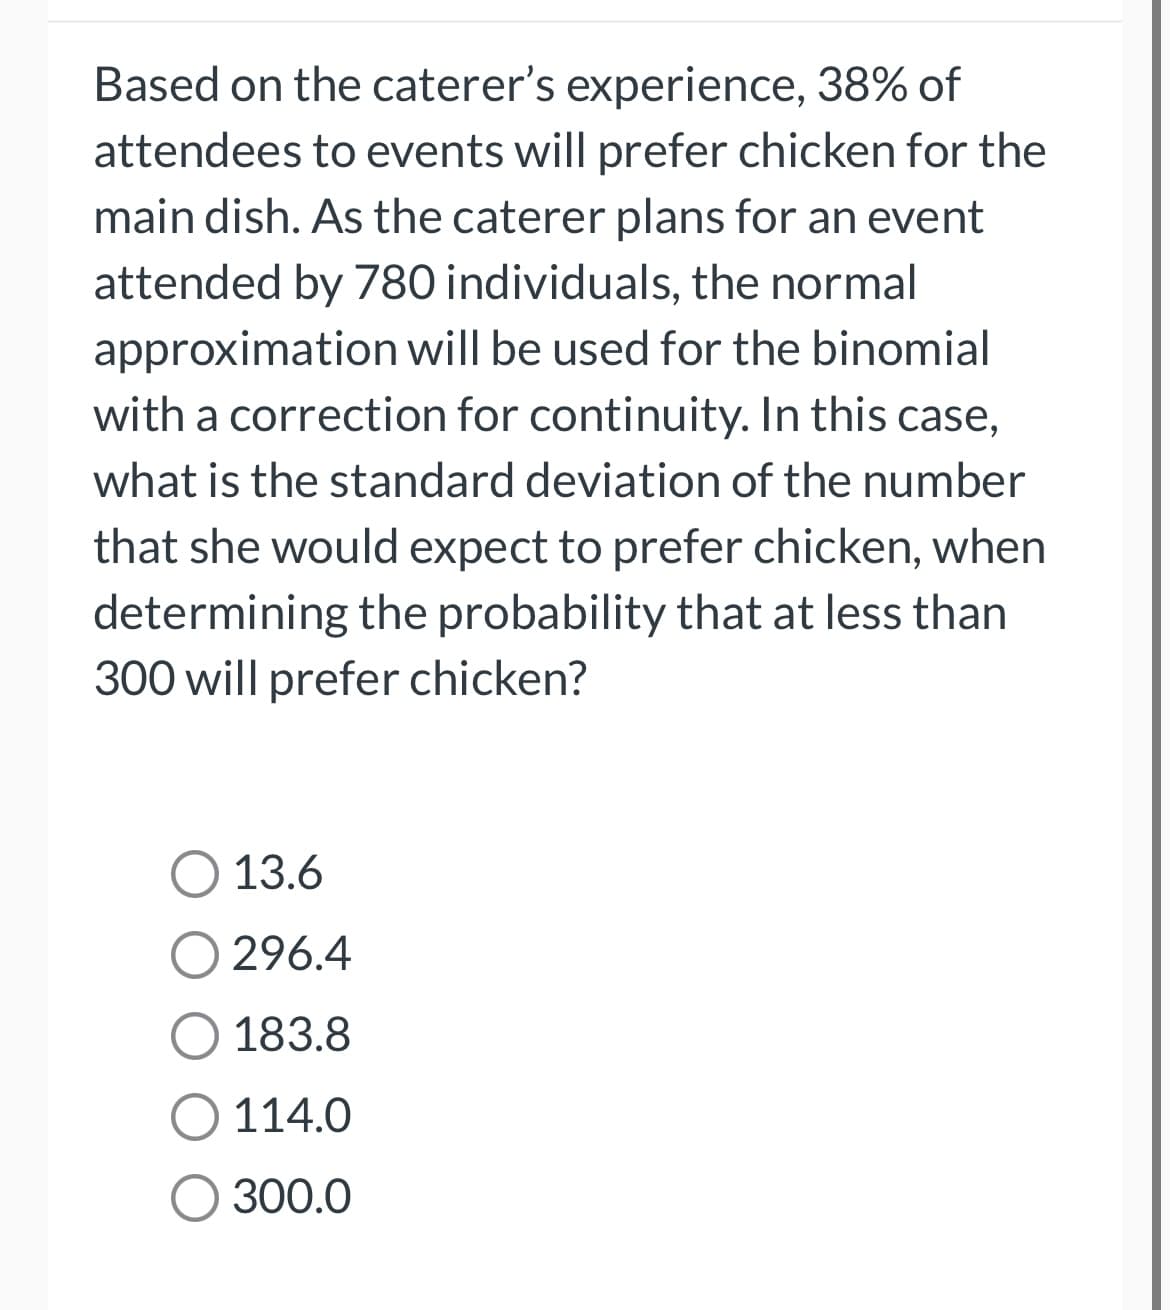 Based on the caterer's experience, 38% of
attendees to events will prefer chicken for the
main dish. As the caterer plans for an event
attended by 780 individuals, the normal
approximation will be used for the binomial
with a correction for continuity. In this case,
what is the standard deviation of the number
that she would expect to prefer chicken, when
determining the probability that at less than
300 will prefer chicken?
O 13.6
296.4
O 183.8
O 114.0
O 300.0
